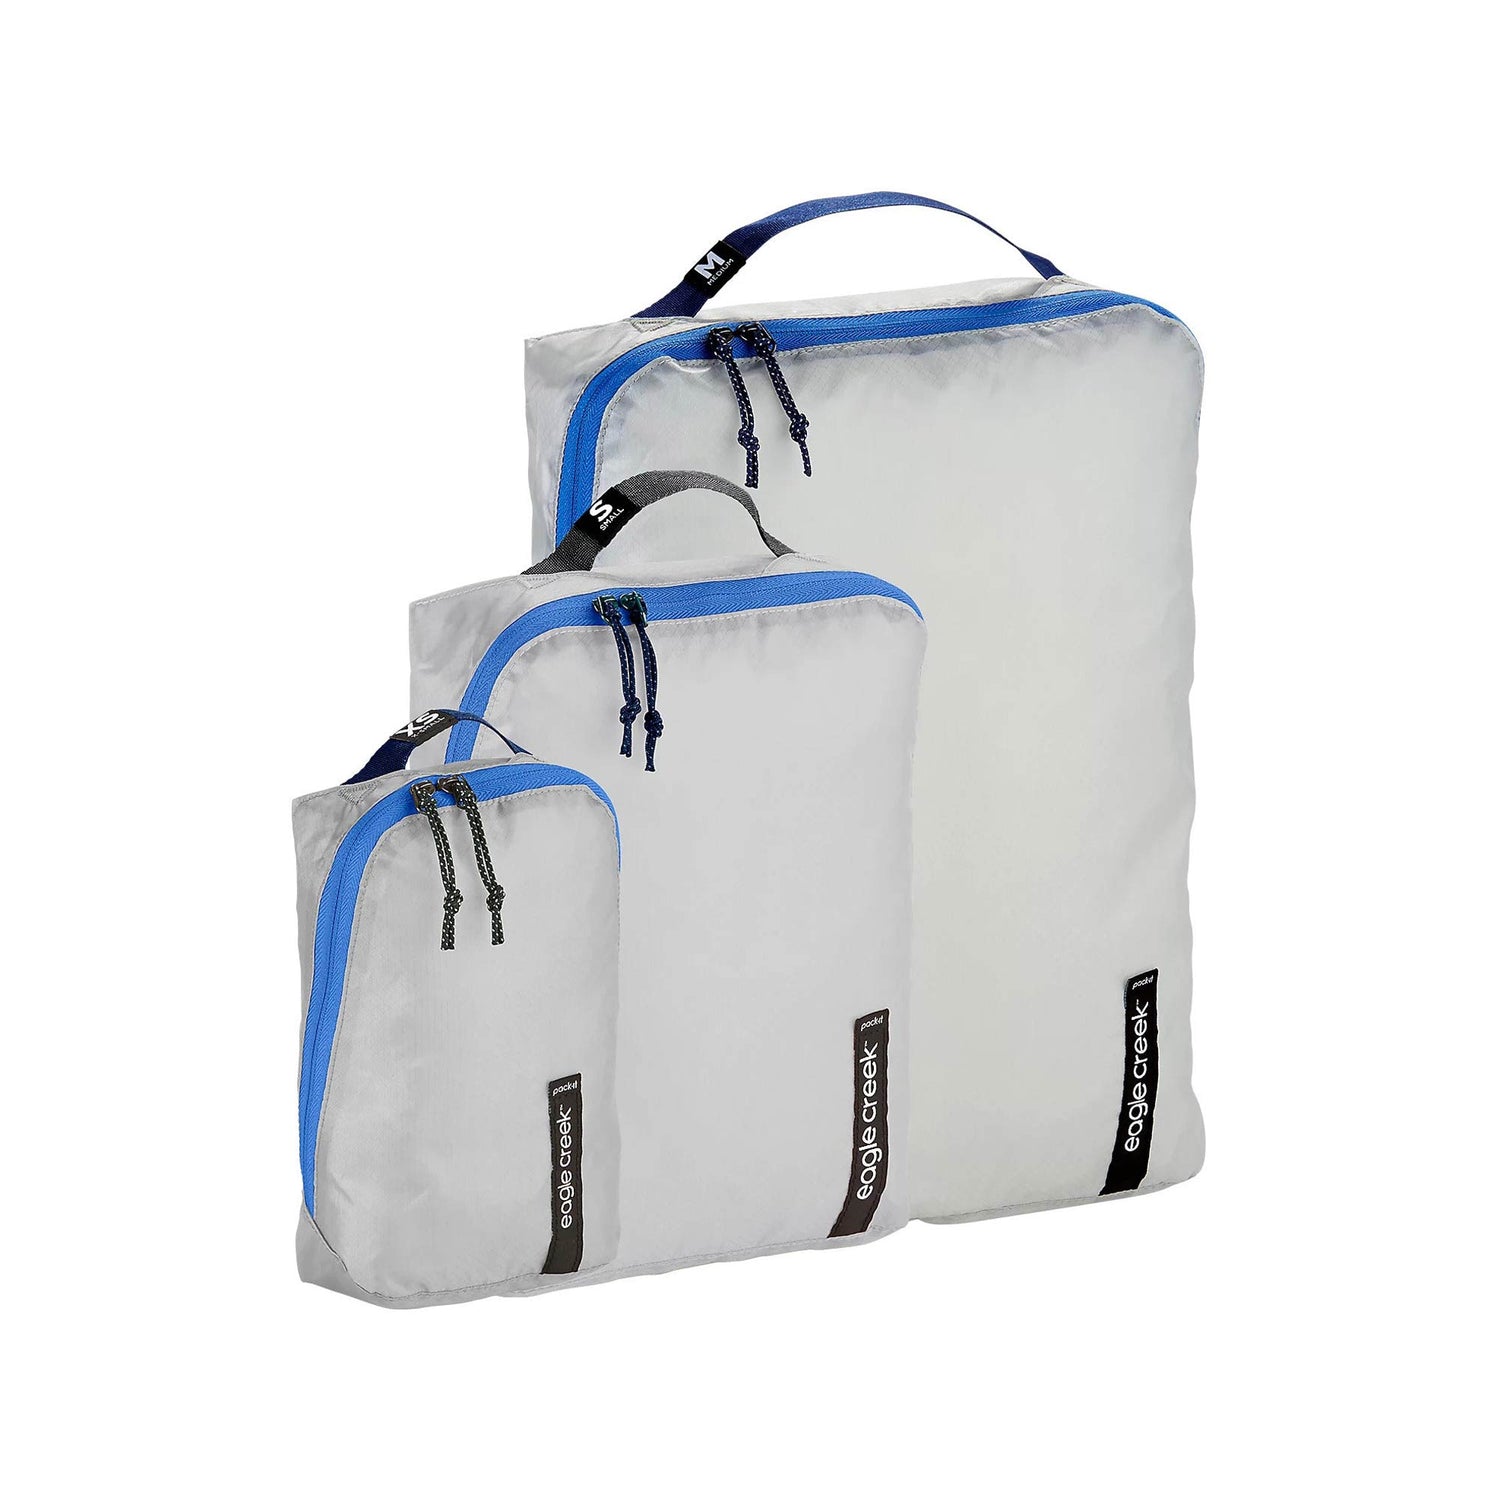 PACK-IT™ Isolate Cube Set XS/S/M - AIZOME BLUE/GREY